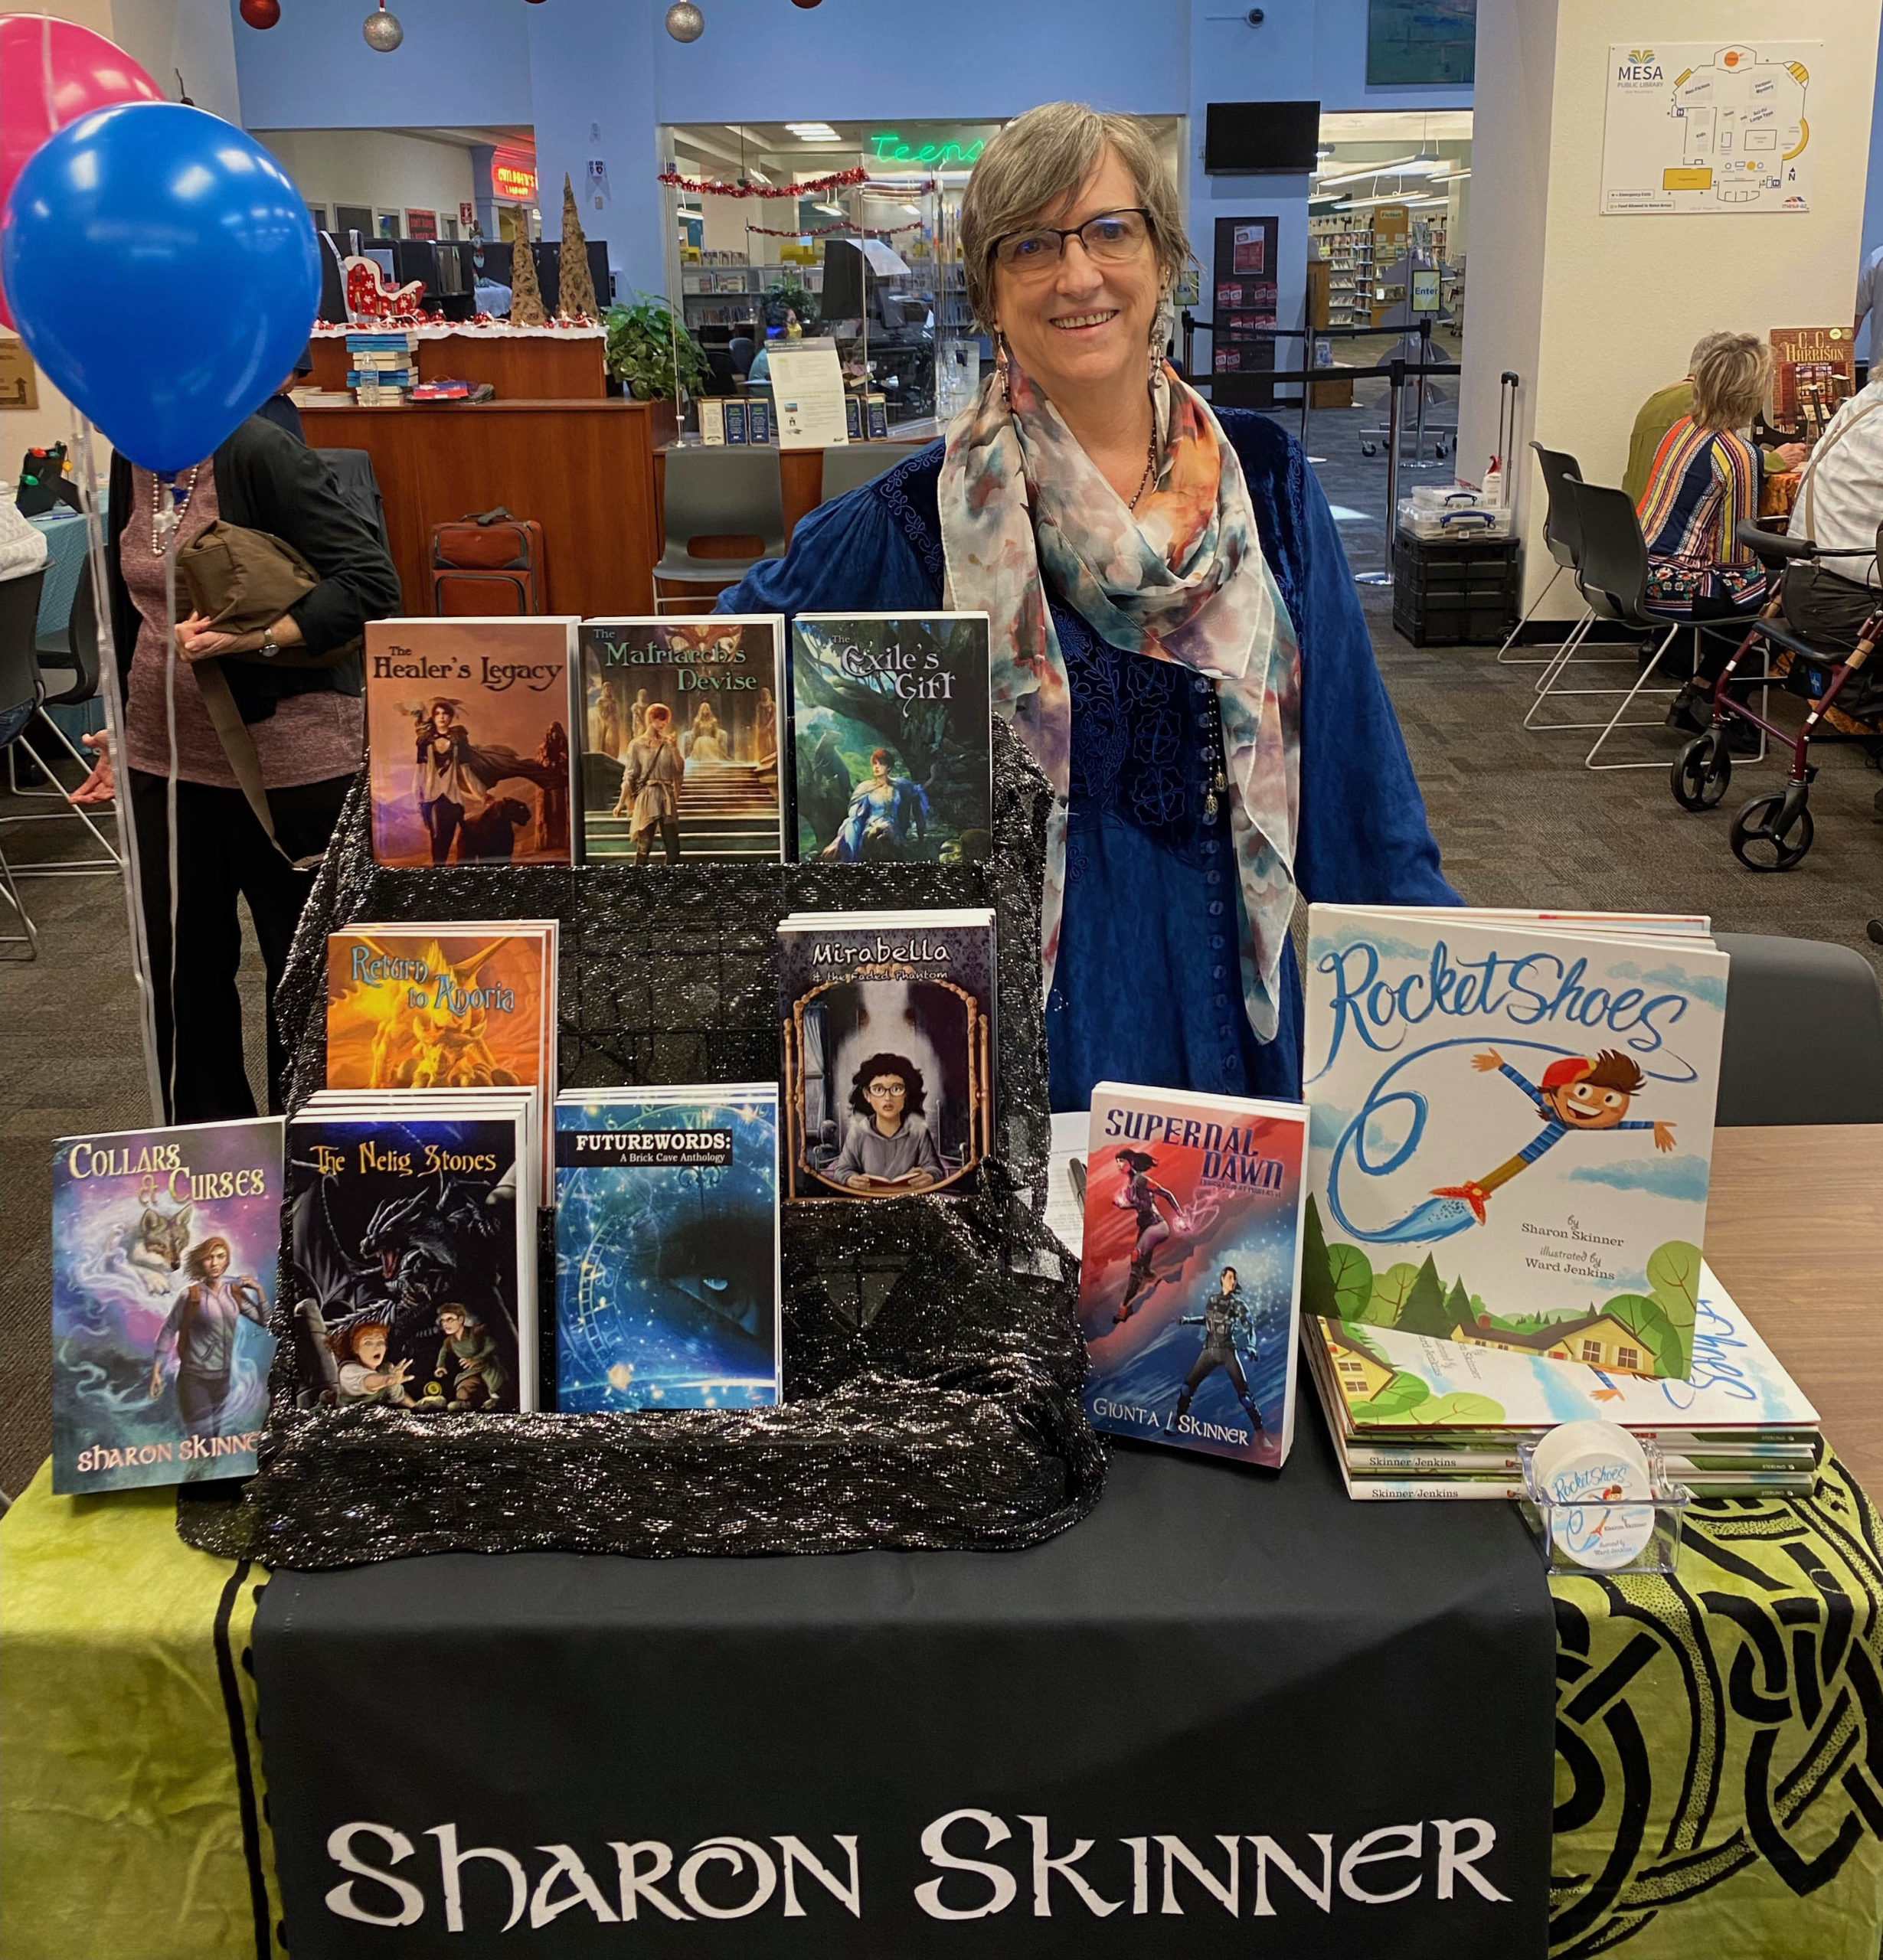 Sharon Skinner standing behind book display at one of her local appearances.